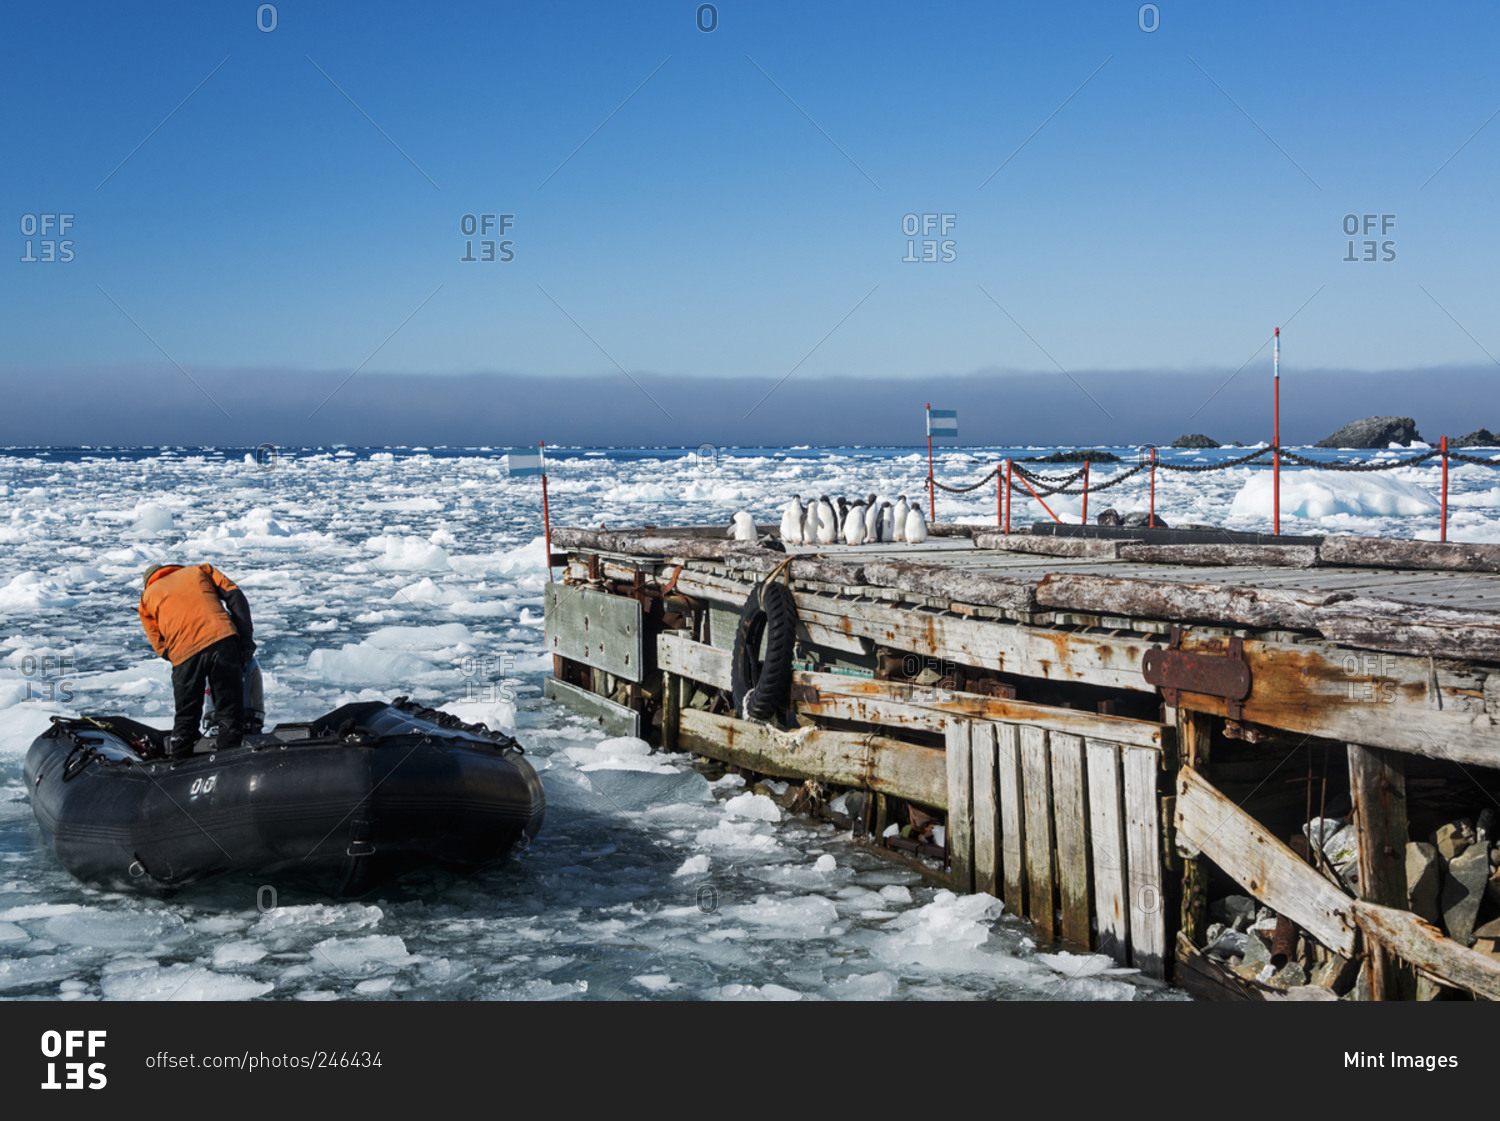 A scientist in rubber boat on the frozen ocean at Esperanza Base with Adelie penguins on the dock